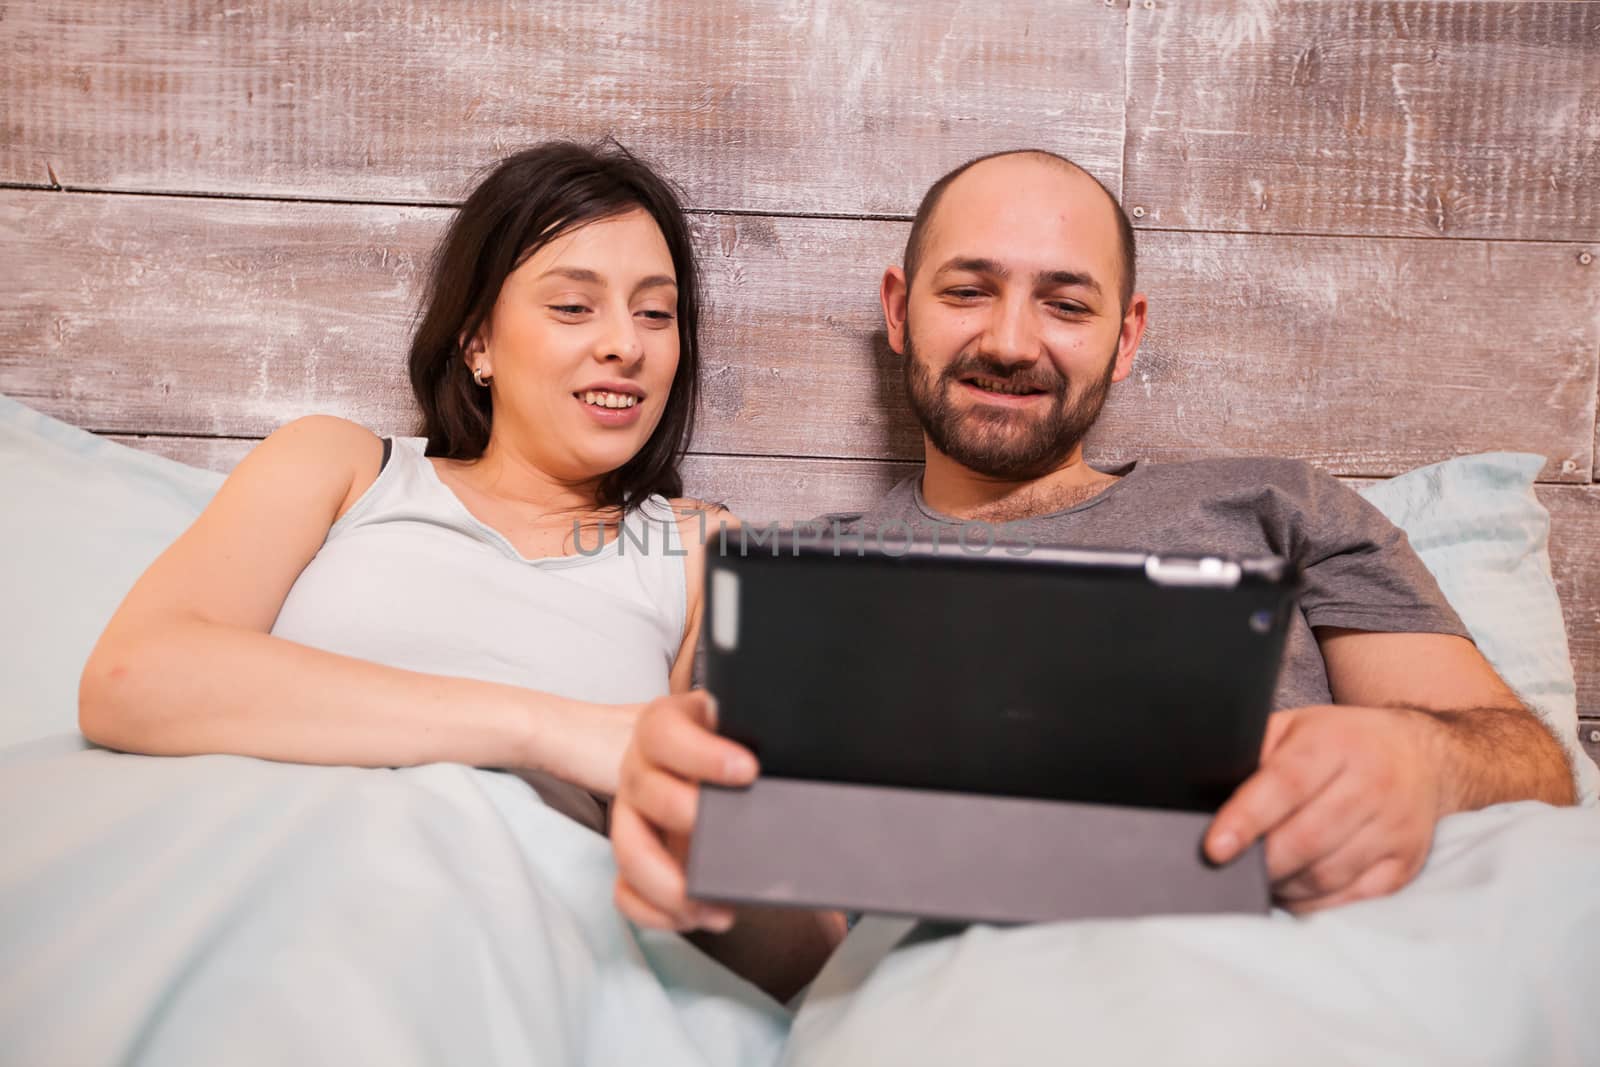 Beautiful young couple wearing pajamas sitting side by side in bed at night using tablet computer.